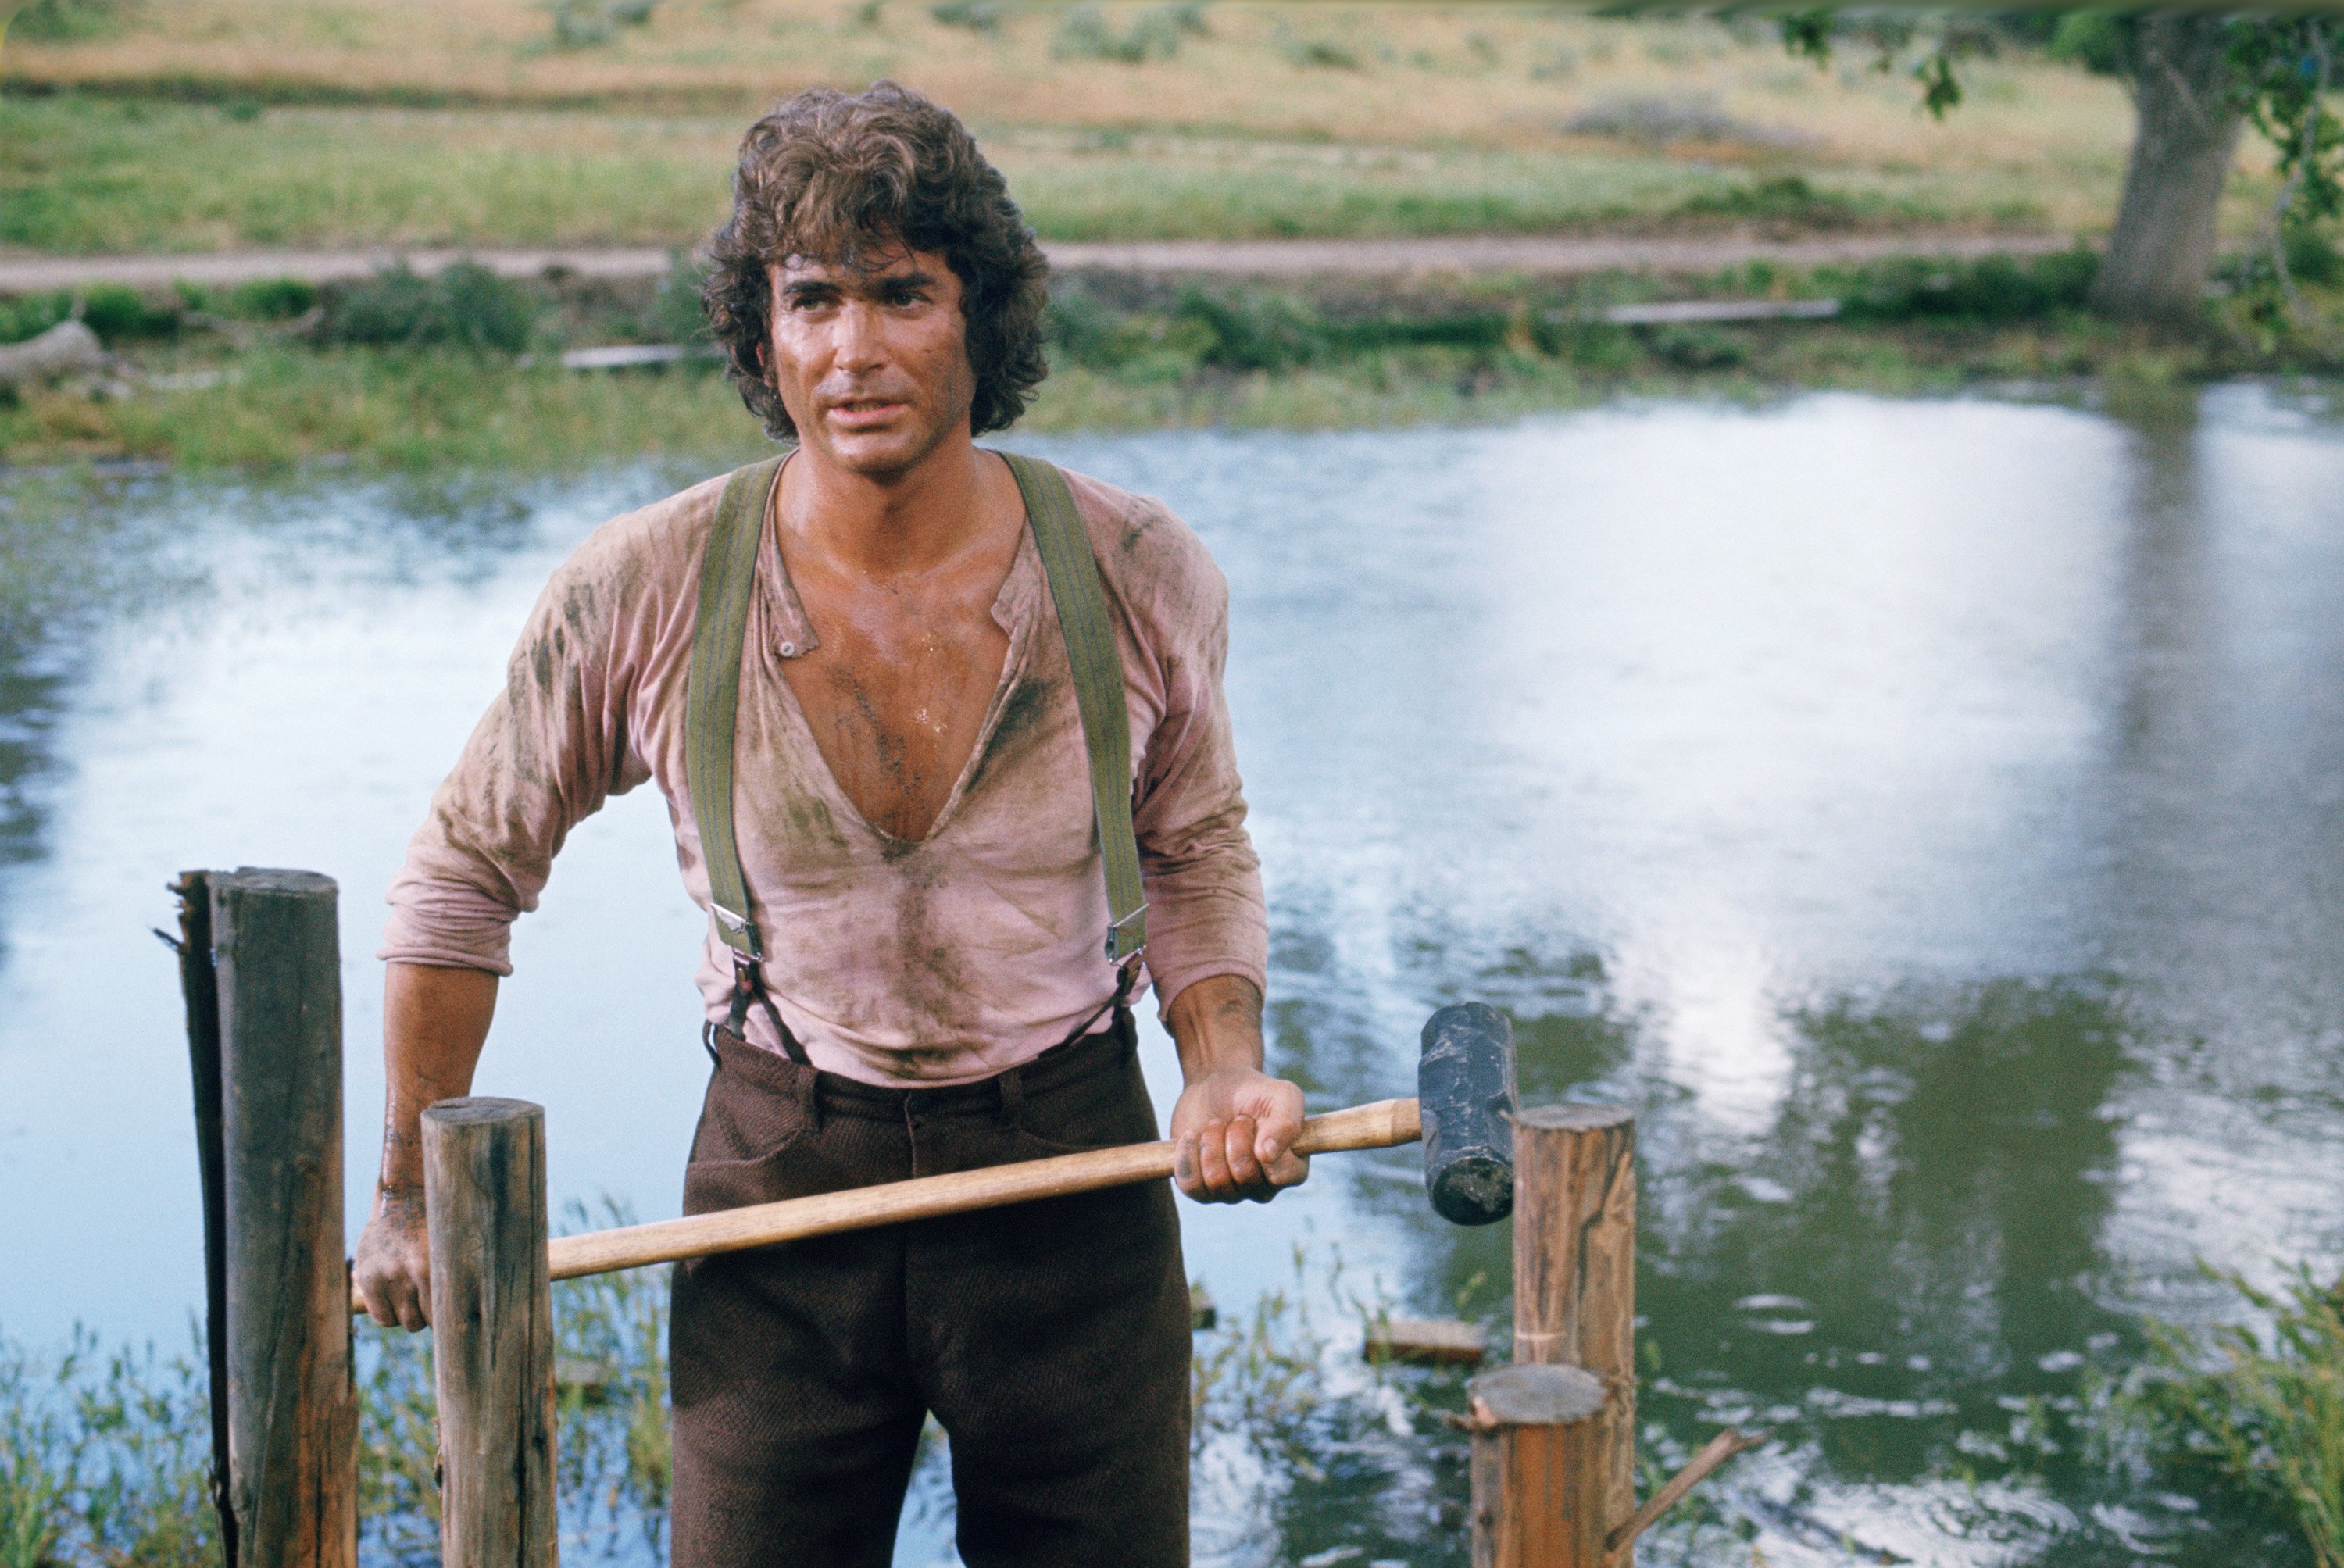 Michael Landon as Charles Philip Ingalls in "Little House on the Prairie." | Source: Getty Images